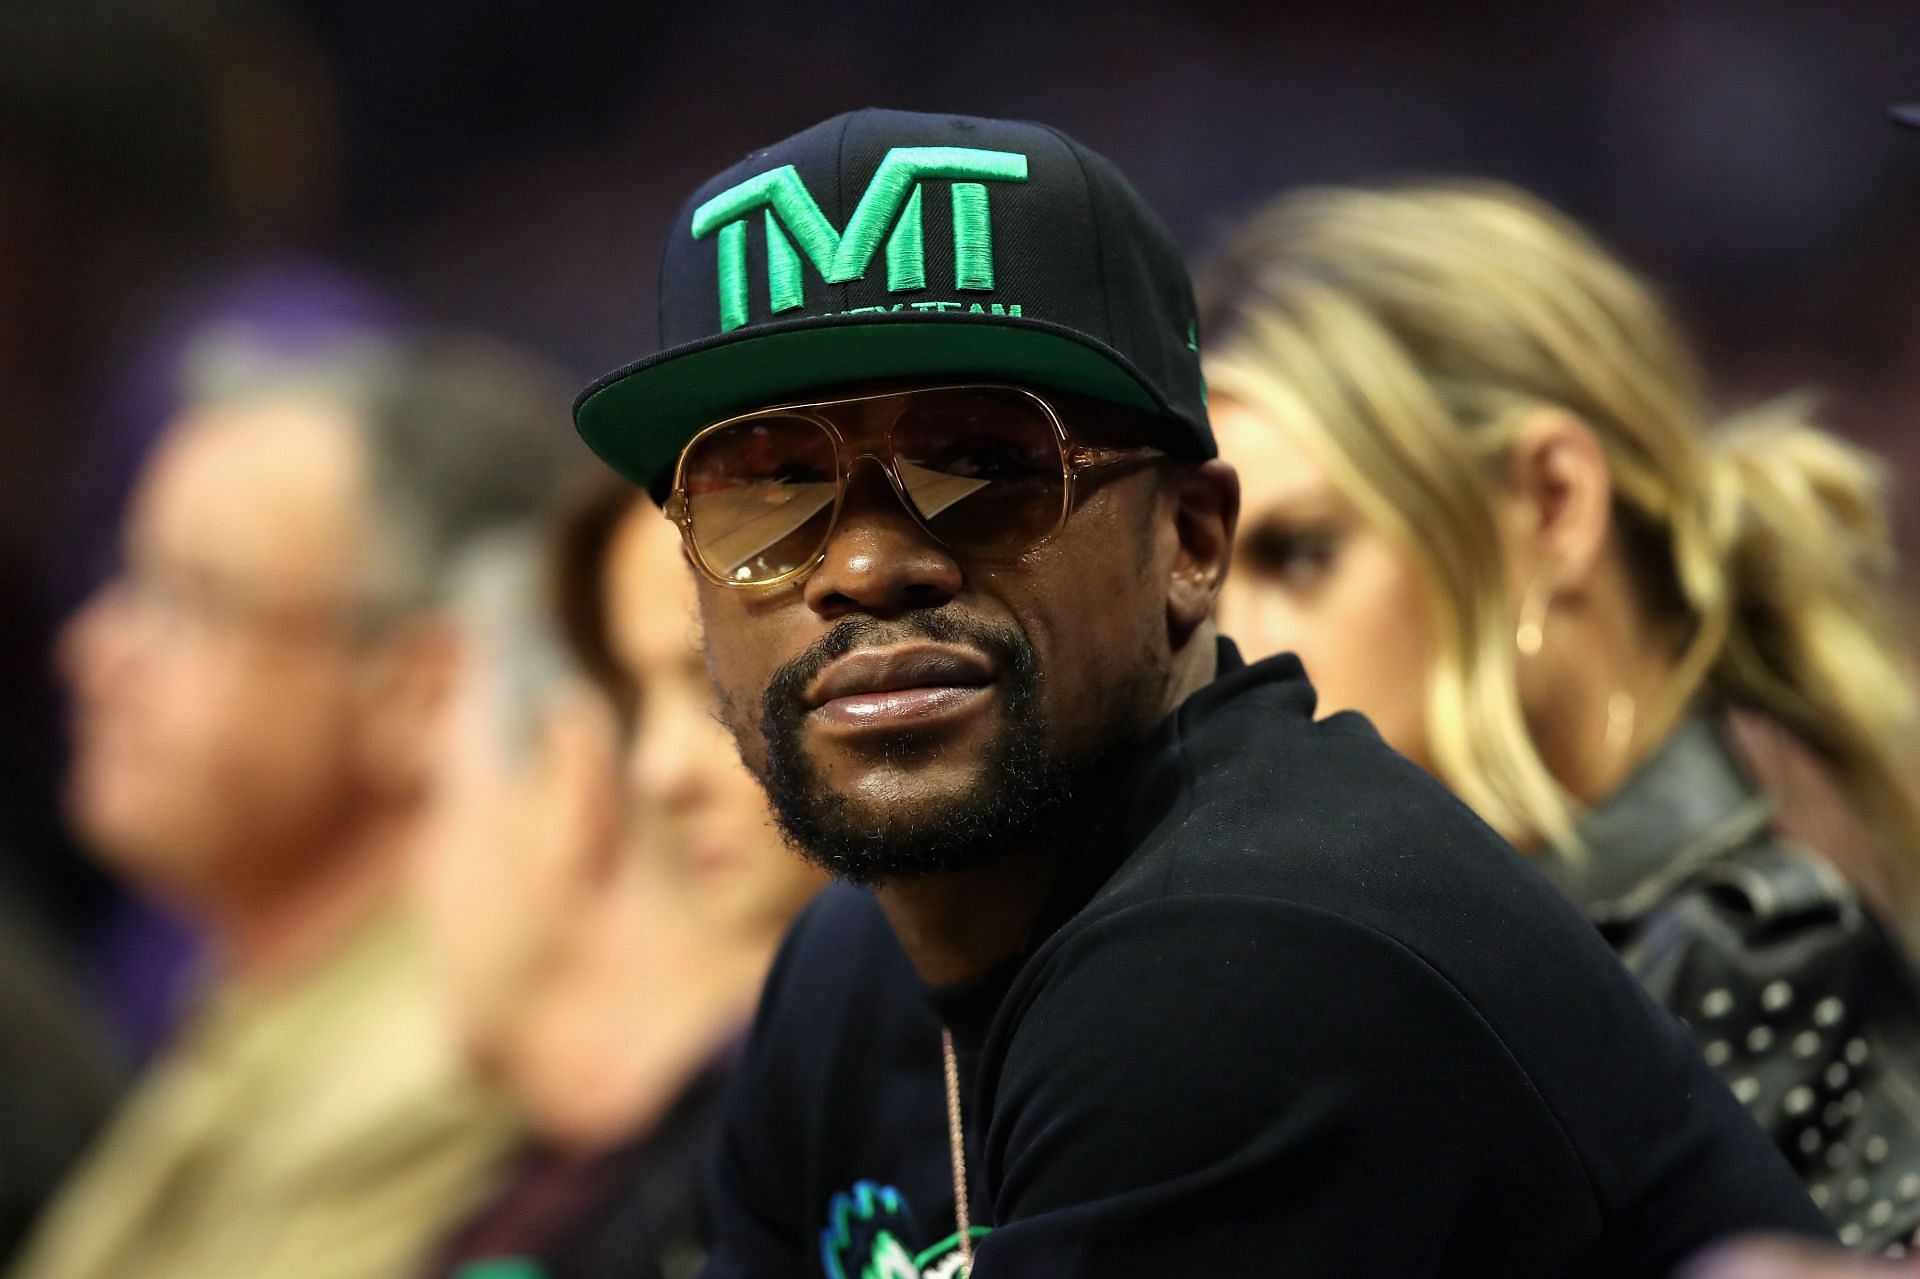 Floyd Mayweather is close to finalizing a deal with NASCAR and Daytona 500